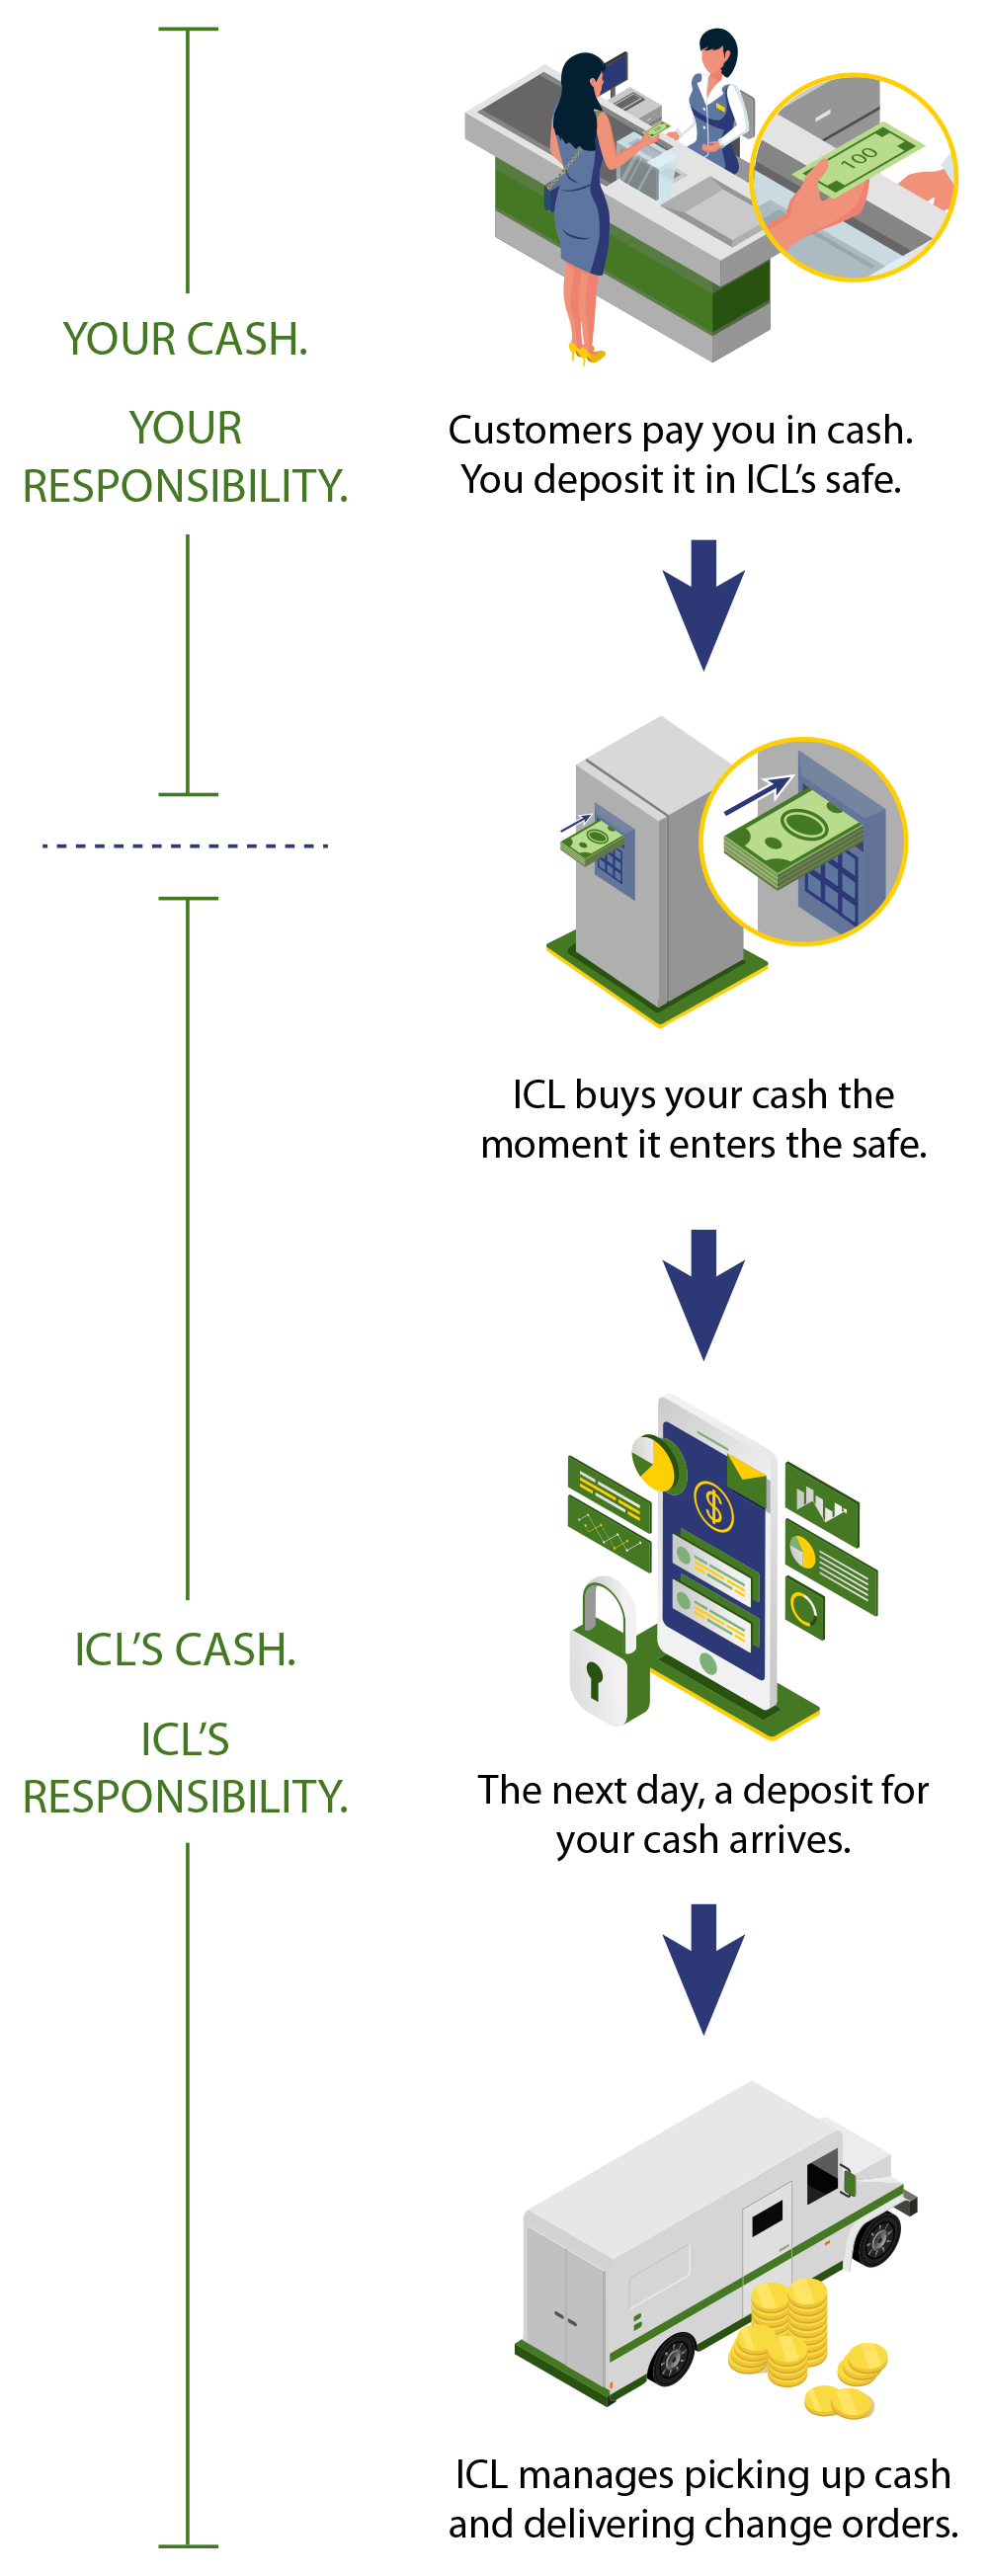 How Cash Management with ICL Works